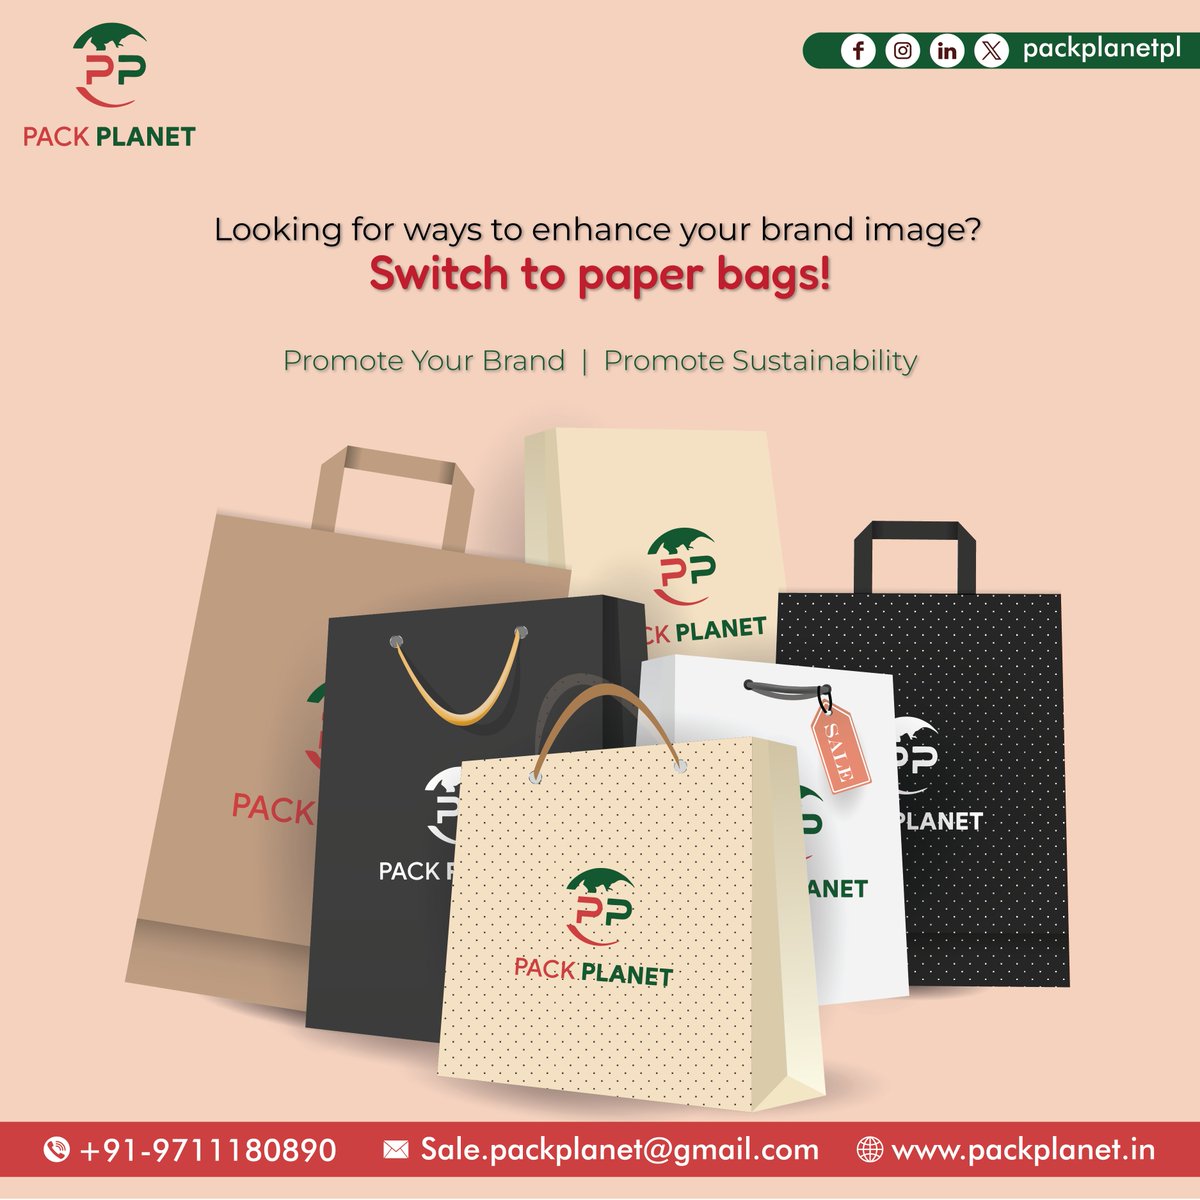 Boost your brand image while promoting sustainability! Make the switch to paper bags for a chic and eco-conscious solution. 🌟
#BrandPromotion #SustainableChoice #PaperBags